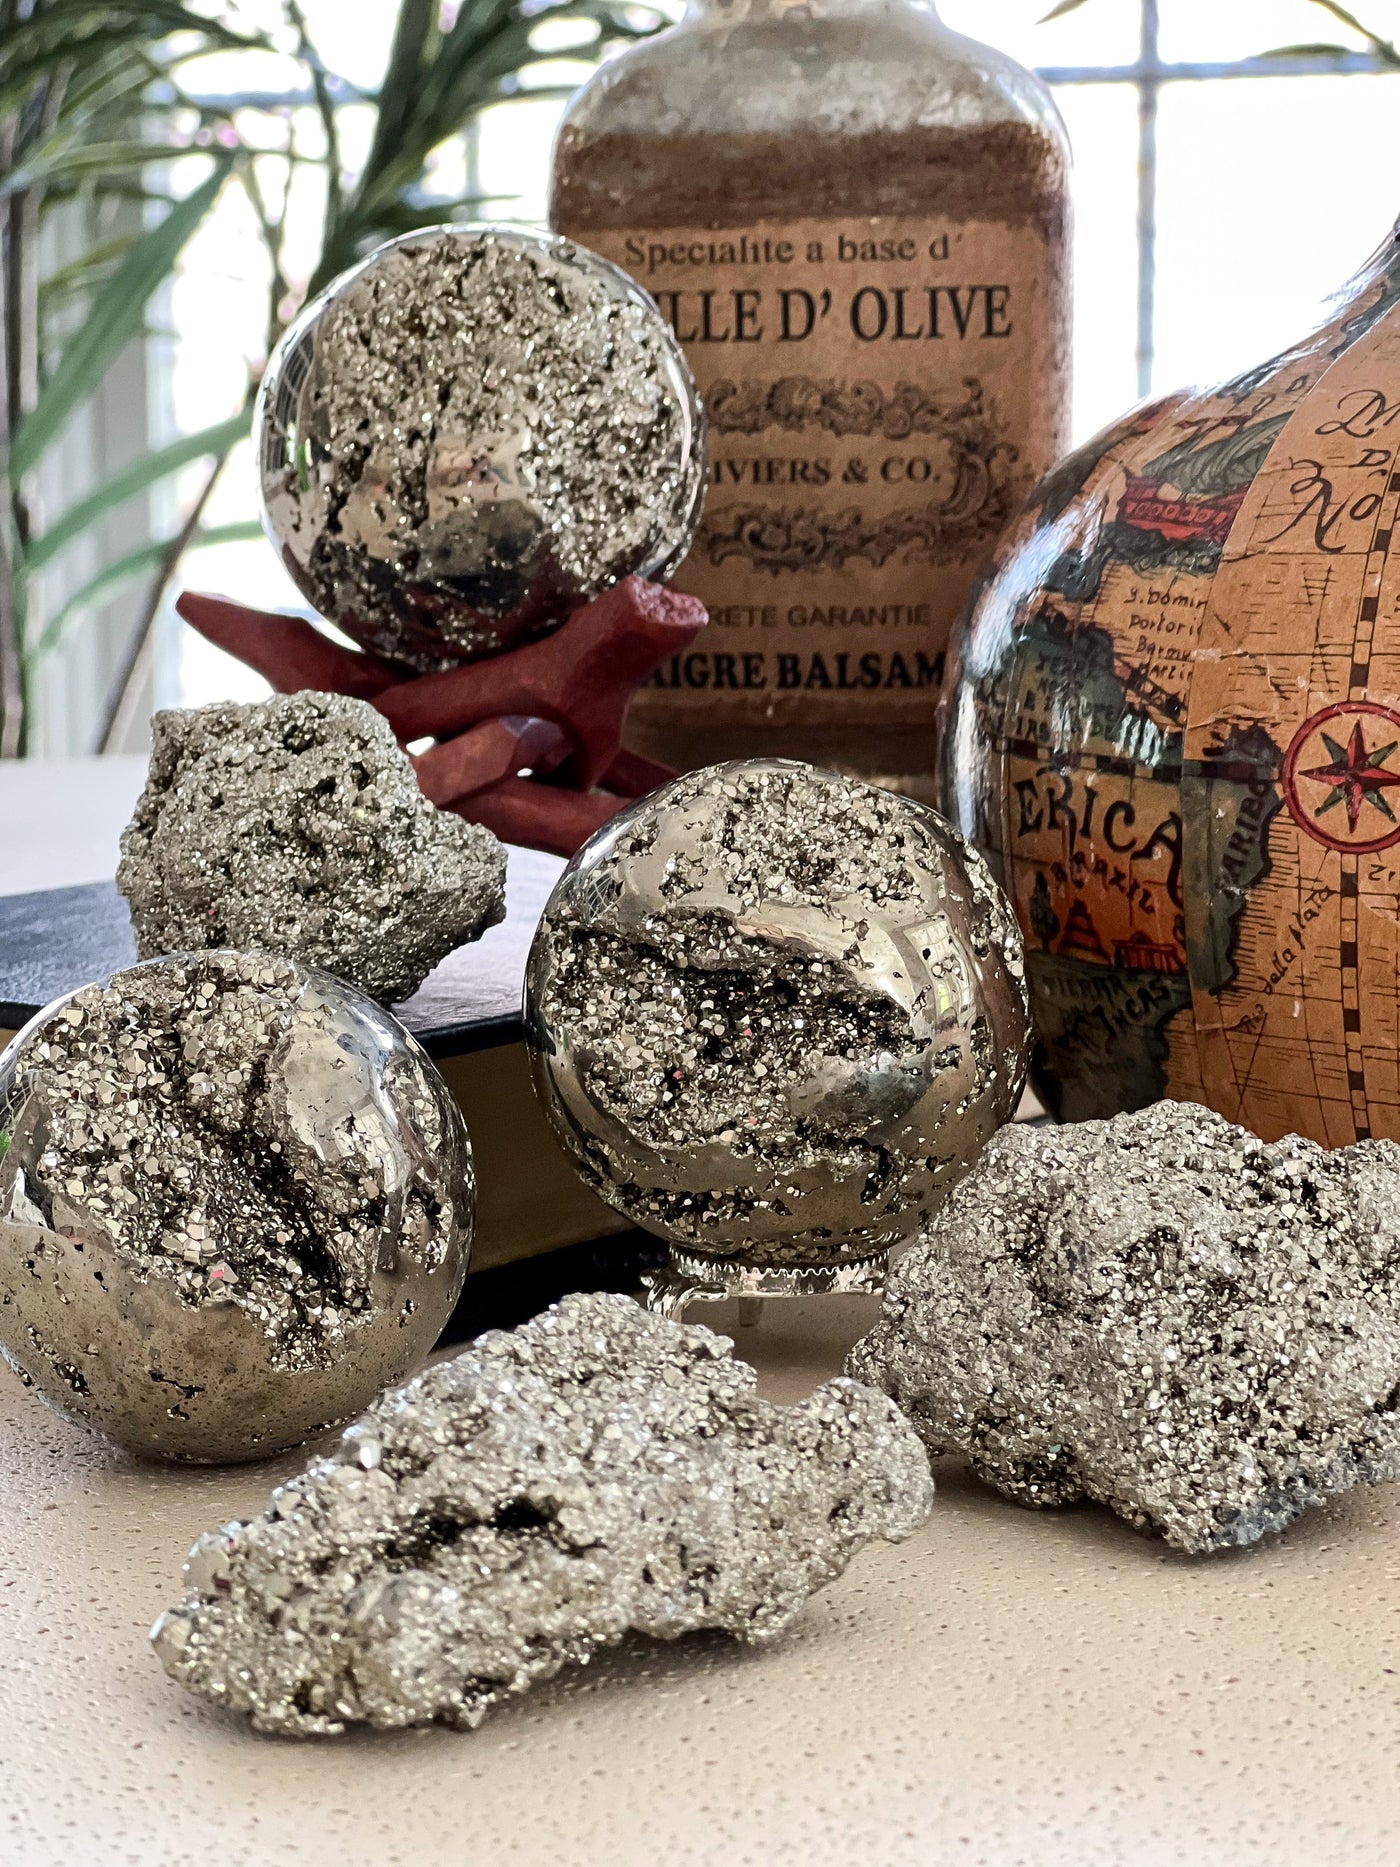 PYRITE SPHERES FROM PERU Revive In Style Vintage Furniture Painted Refinished Redesign Beautiful One of a Kind Artistic Antique Unique Home Decor Interior Design French Country Shabby Chic Cottage Farmhouse Grandmillenial Coastal Chalk Paint Metallic Glam Eclectic Quality Dovetailed Rustic Furniture Painter Pinterest Bedroom Living Room Entryway Kitchen Home Trends House Styles Decorating ideas